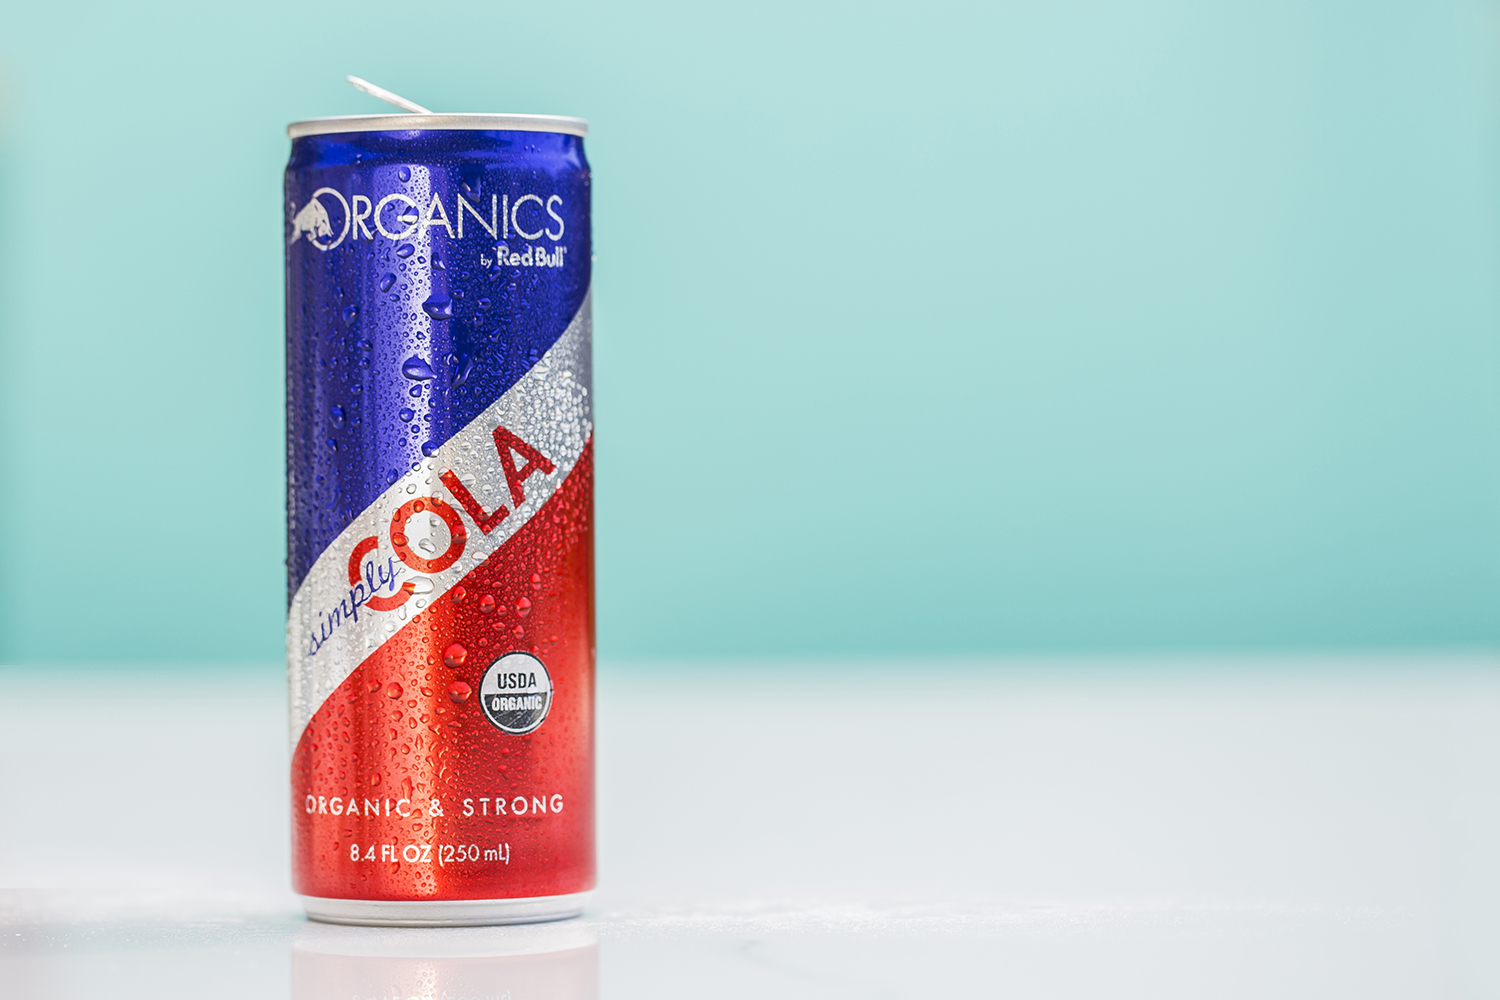 Red Bull Gets Back into the Soda Game with Red Bull Organics - The Manual